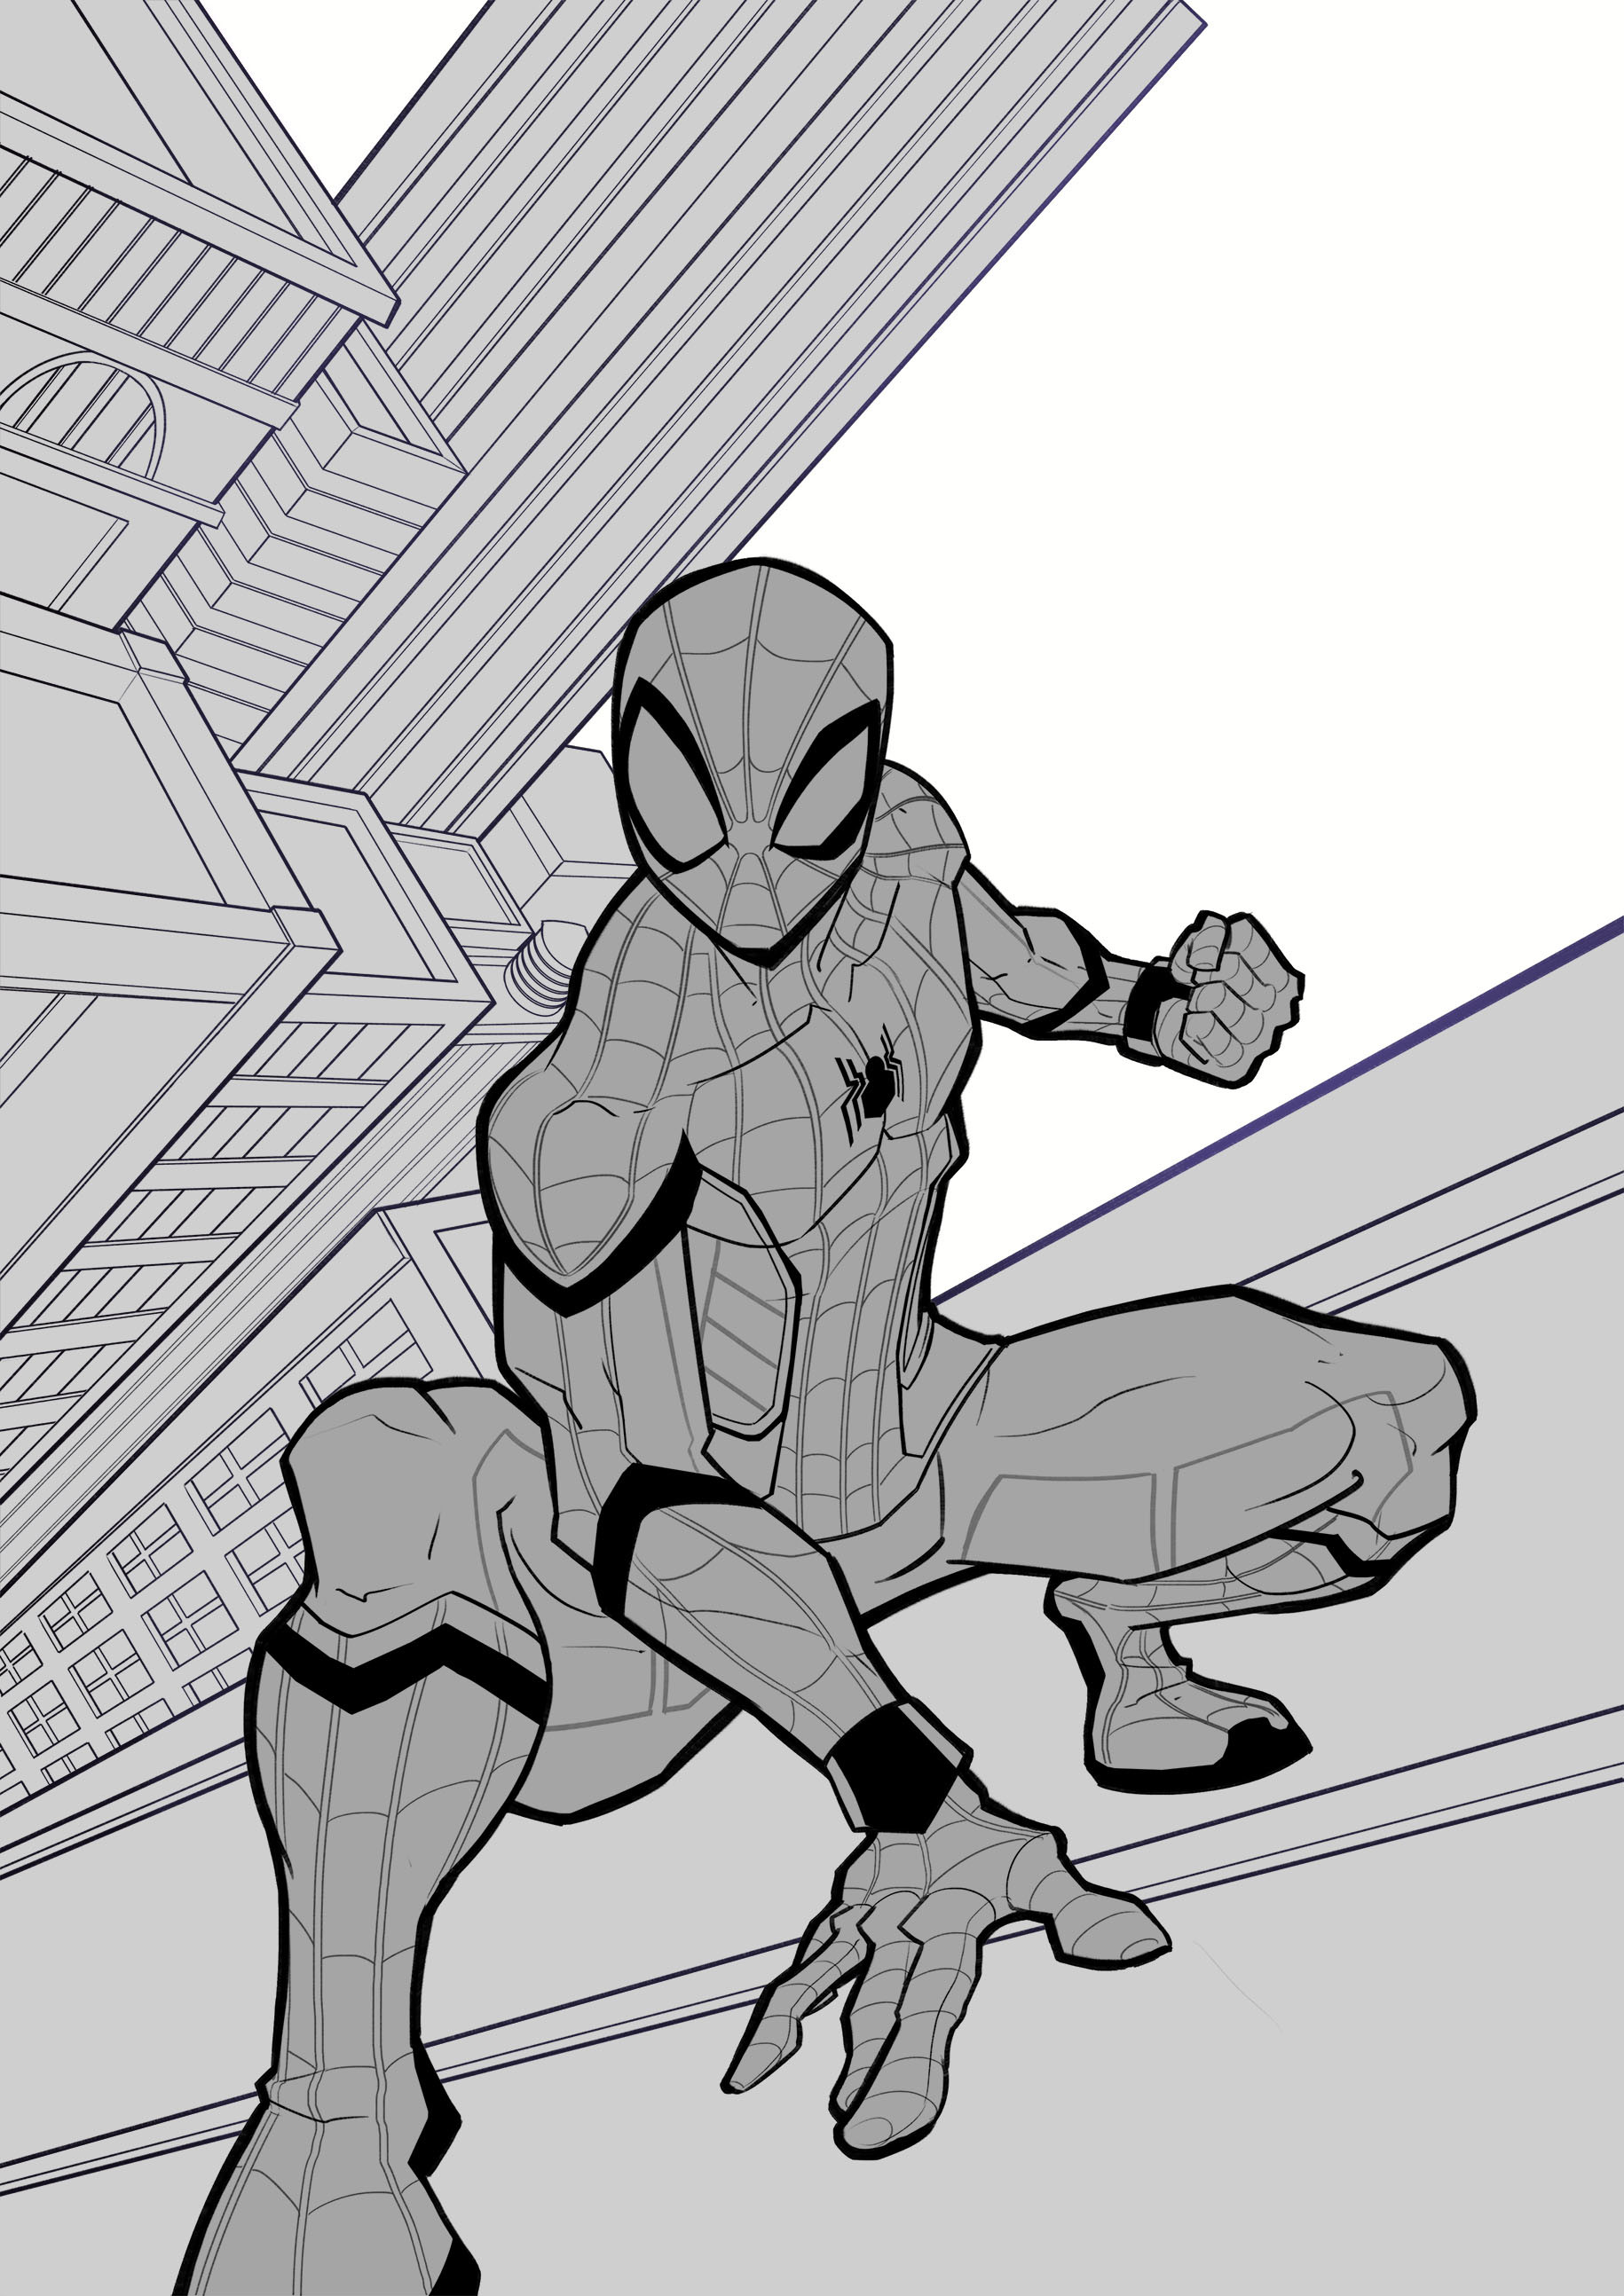 Spider Man Homecoming Coloring Pages That are Bright   Horton Blog